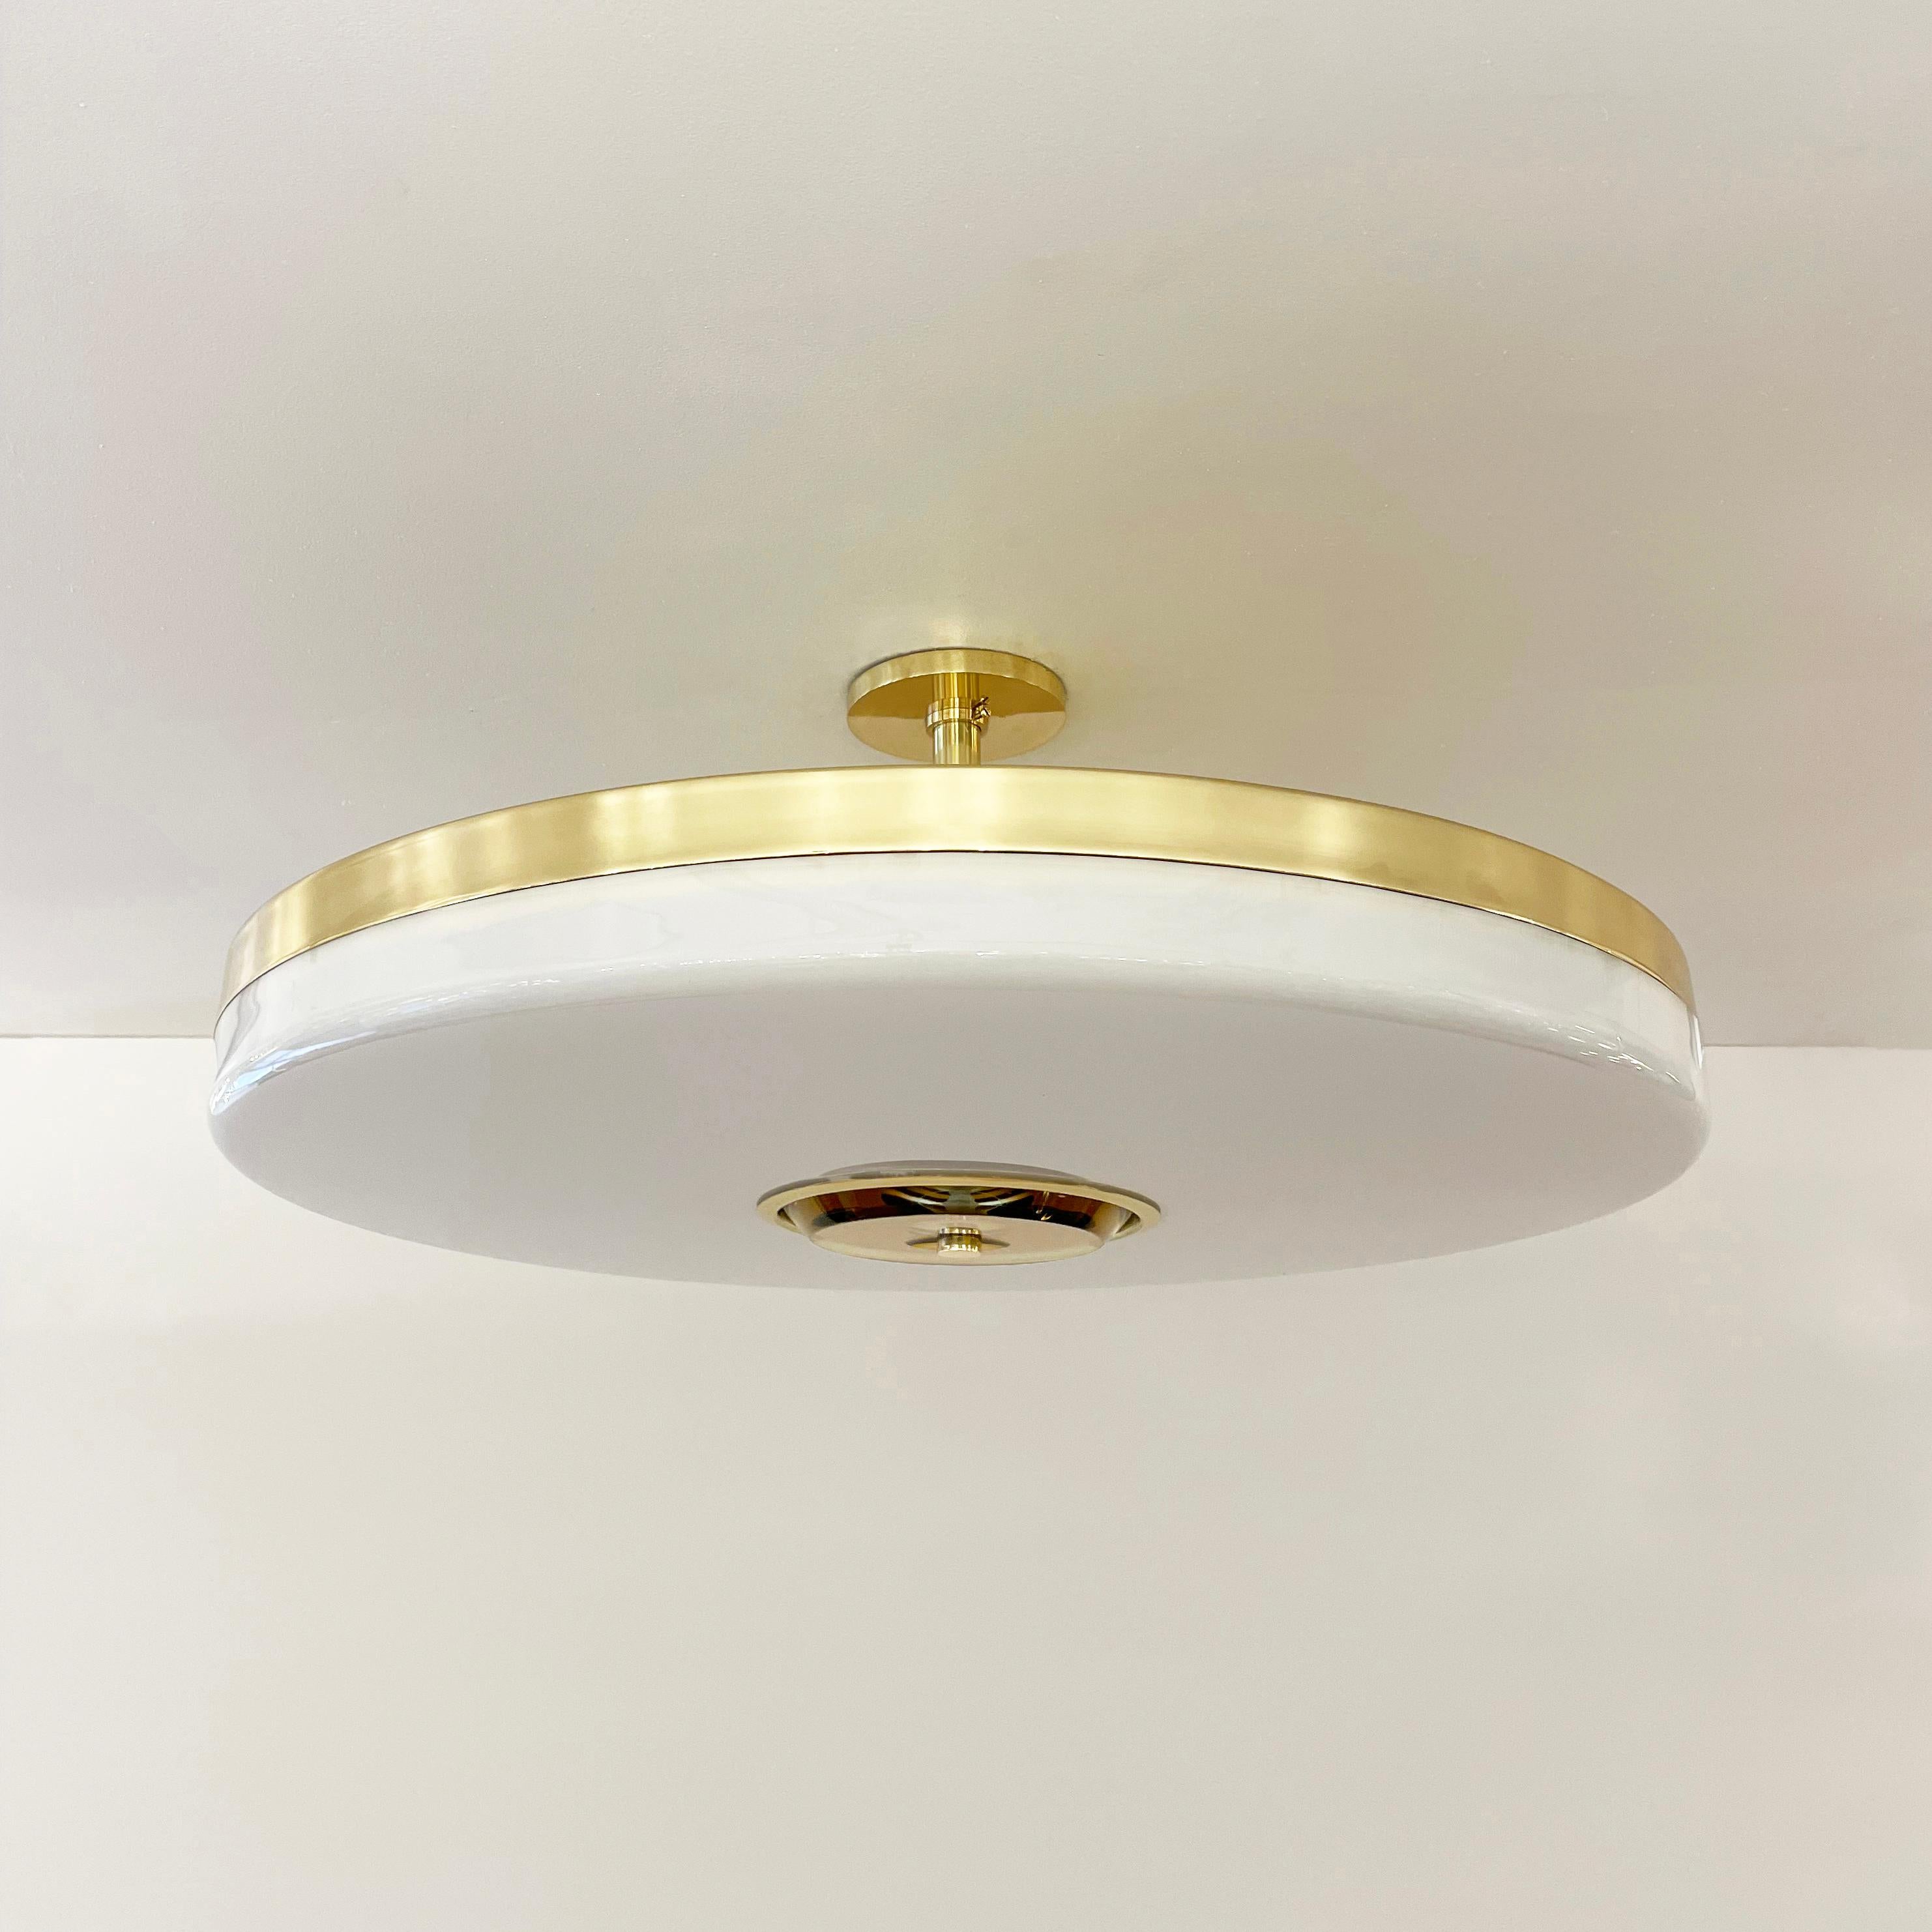 Iris Grande Ceiling Light by Gaspare Asaro-Polished Brass Finish In New Condition For Sale In New York, NY